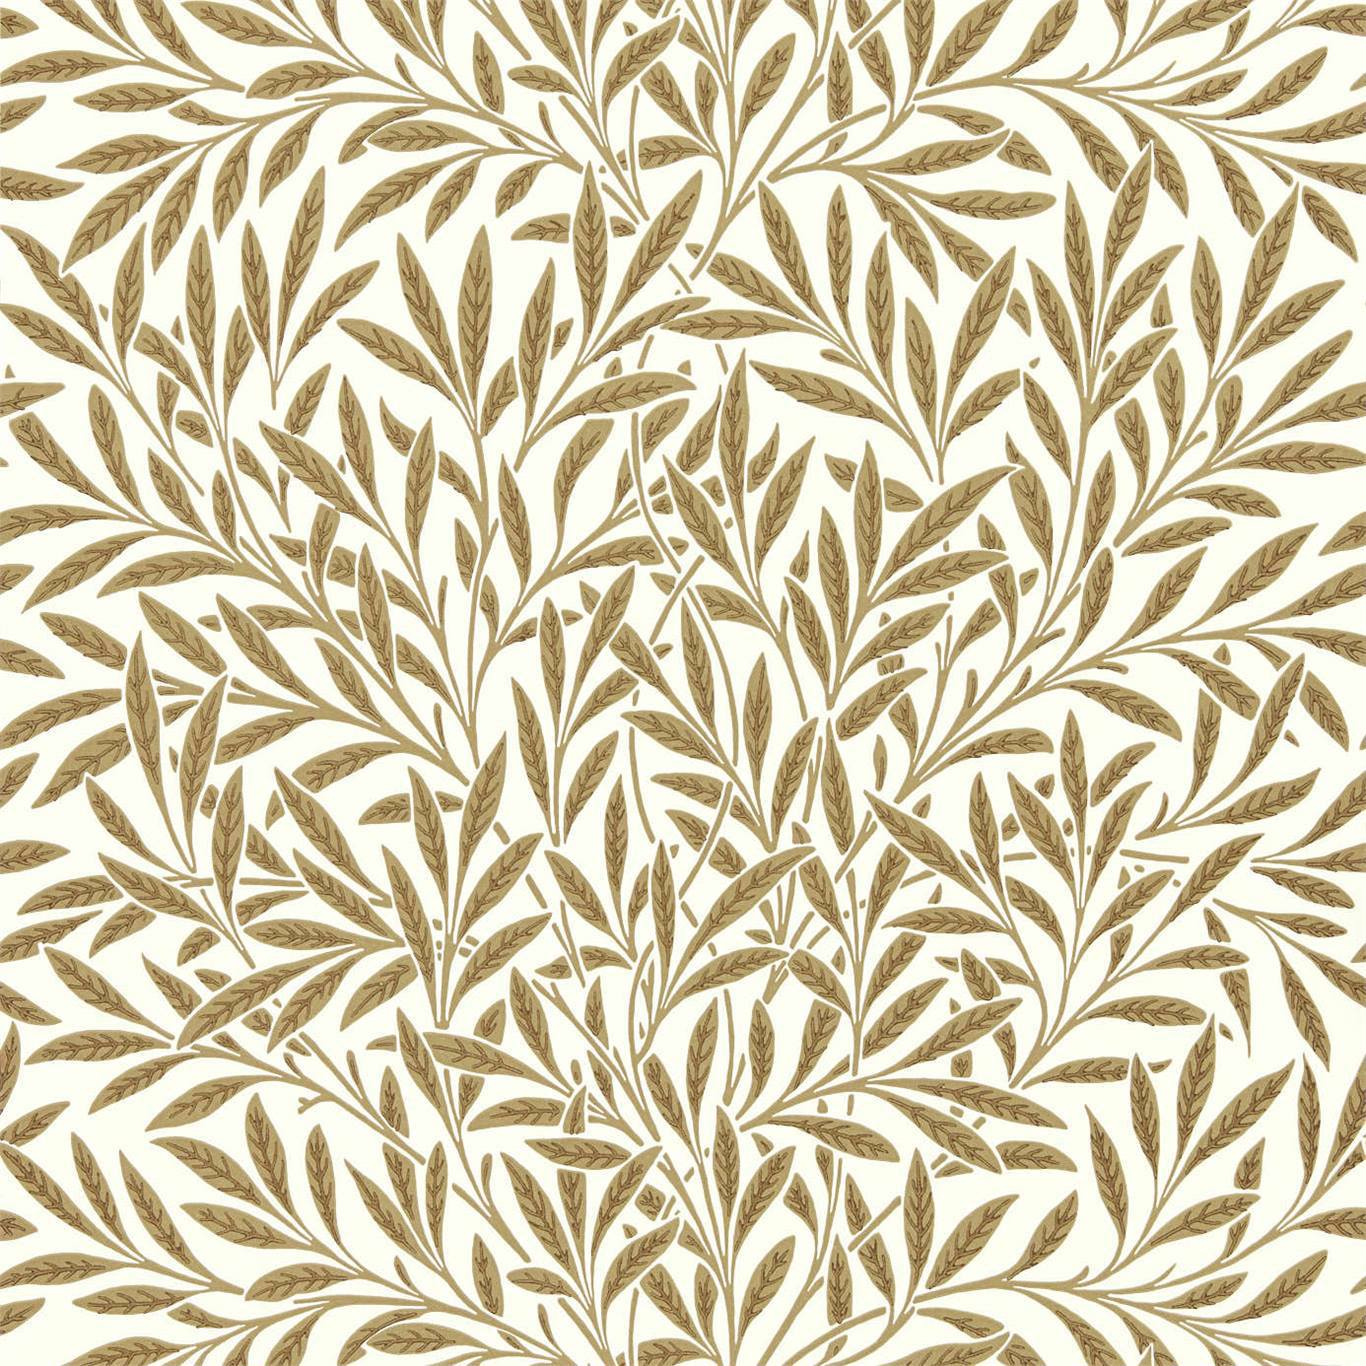 Willow Cream/Brown Wallpaper DBPW216965 by Morris & Co